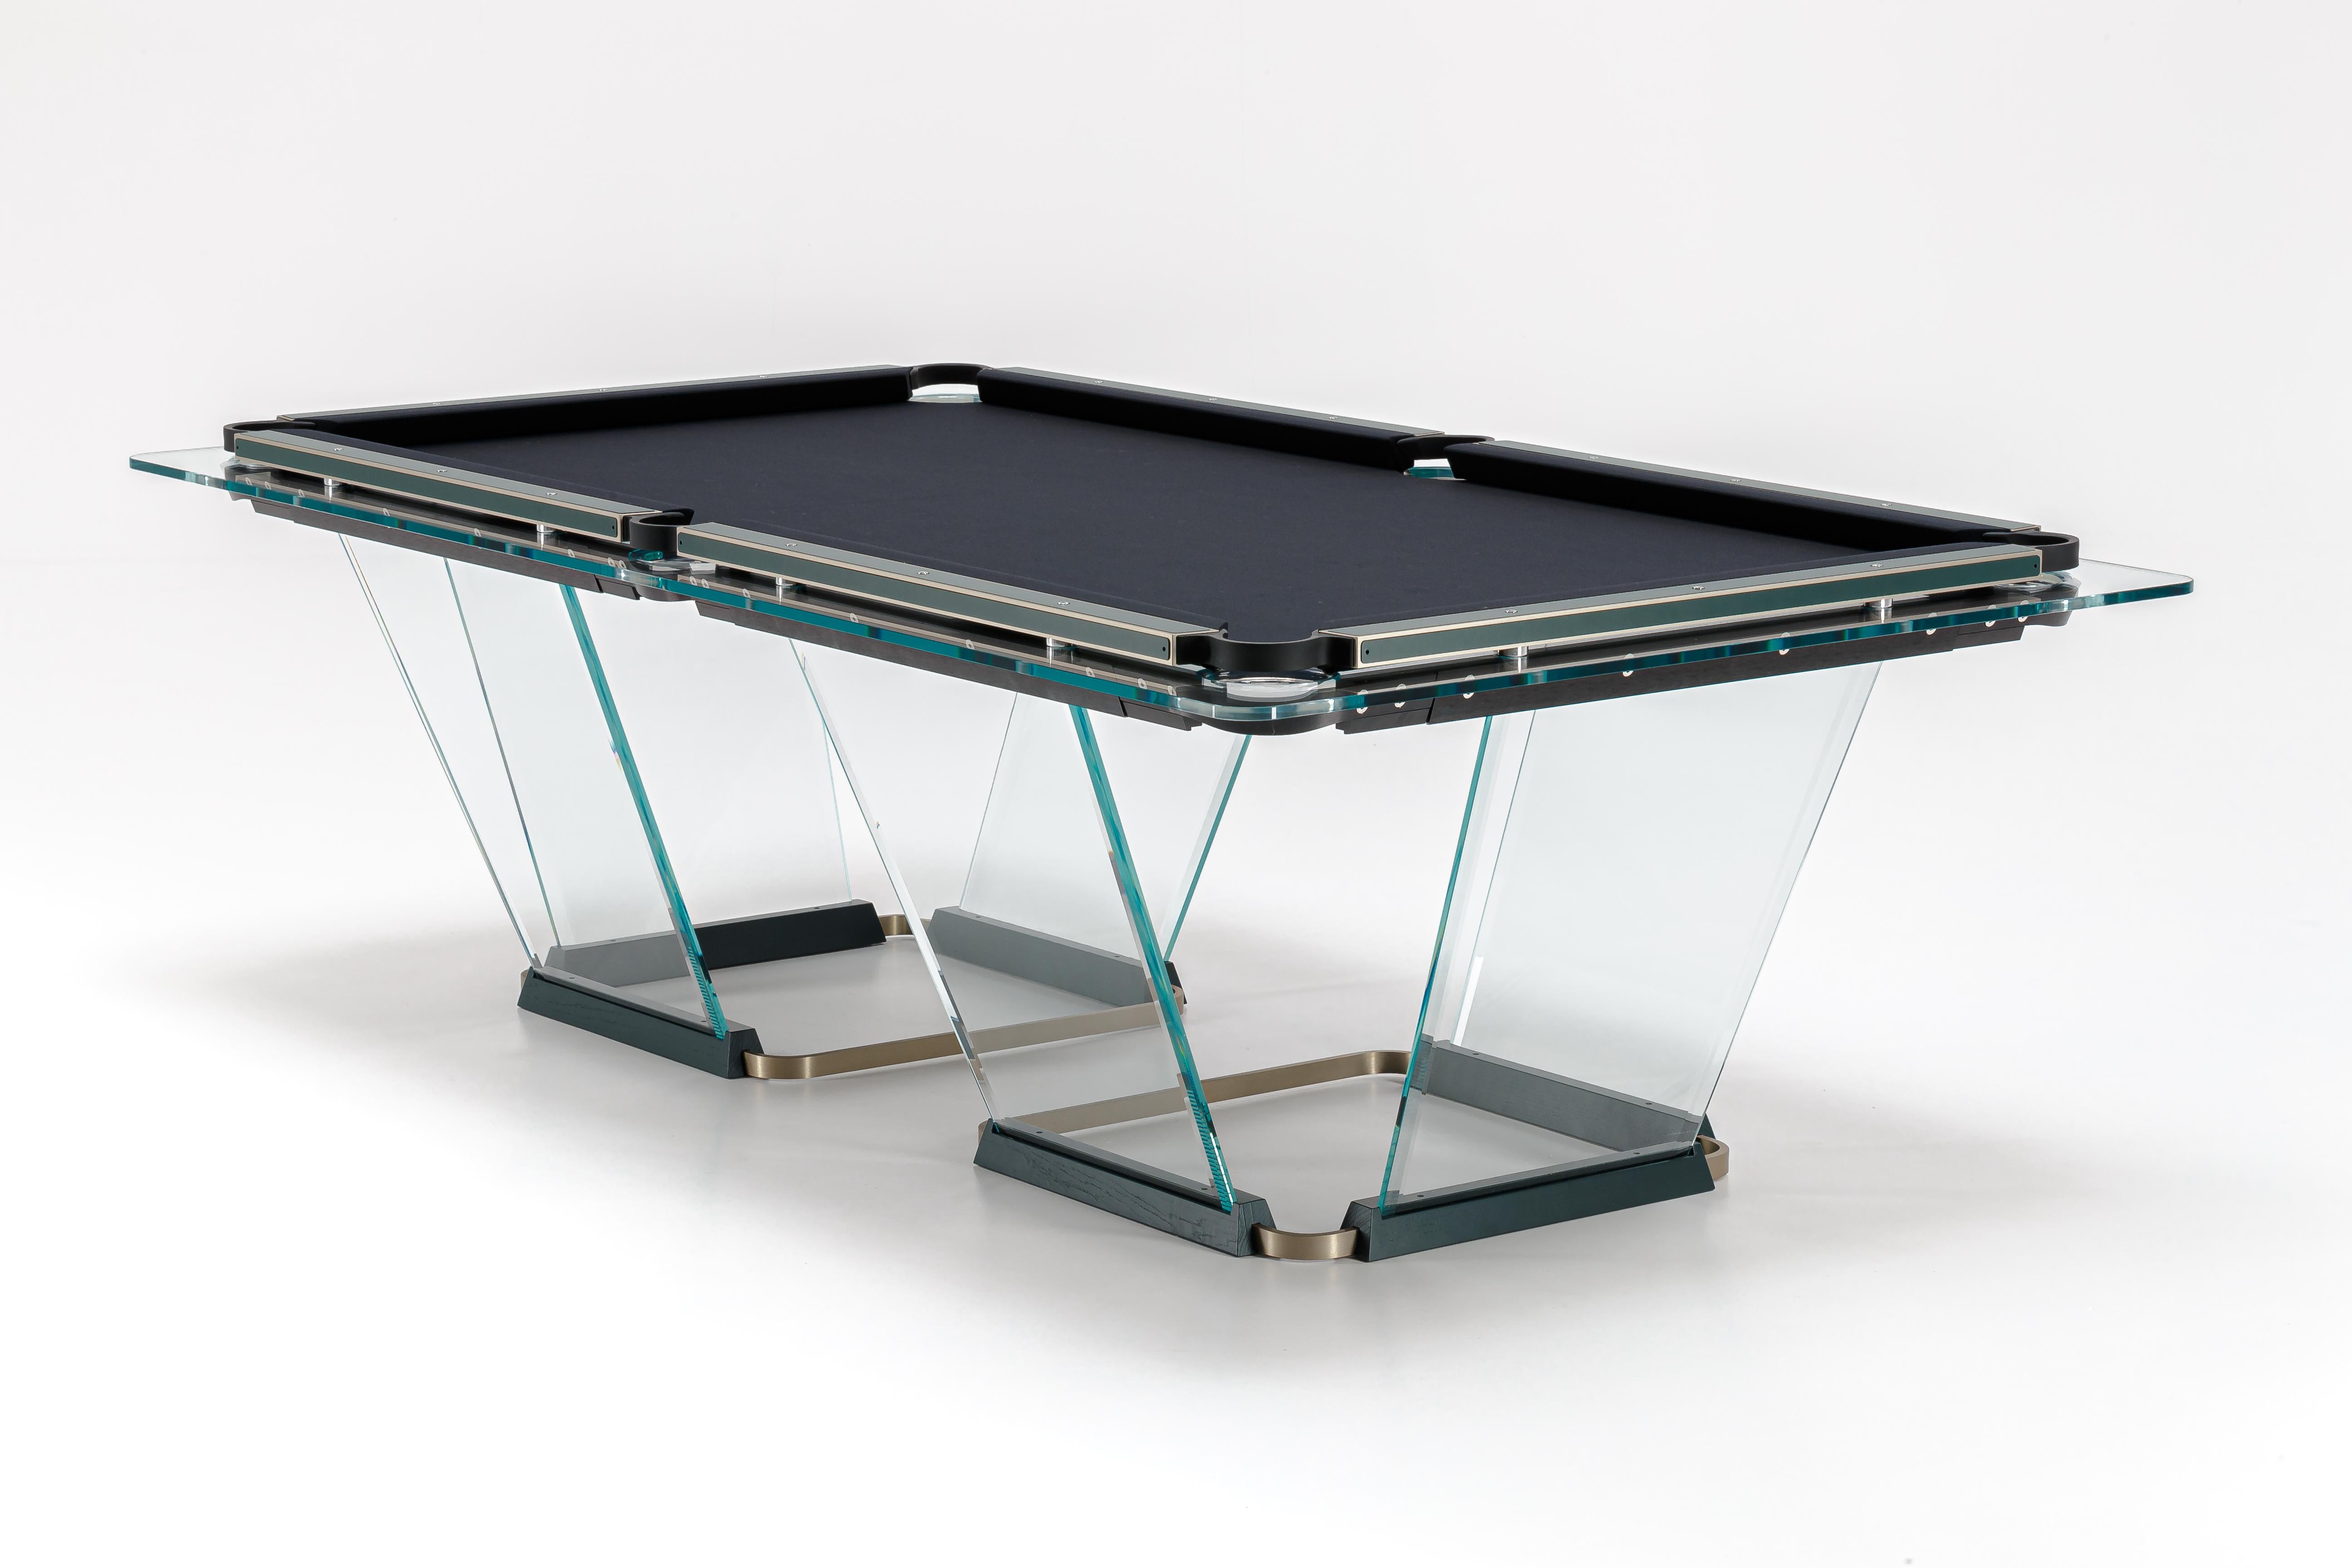 T1.3" Crystal Pool Nine Feet Size Table Designed by Marc Sadler for Teckell  For Sale at 1stDibs